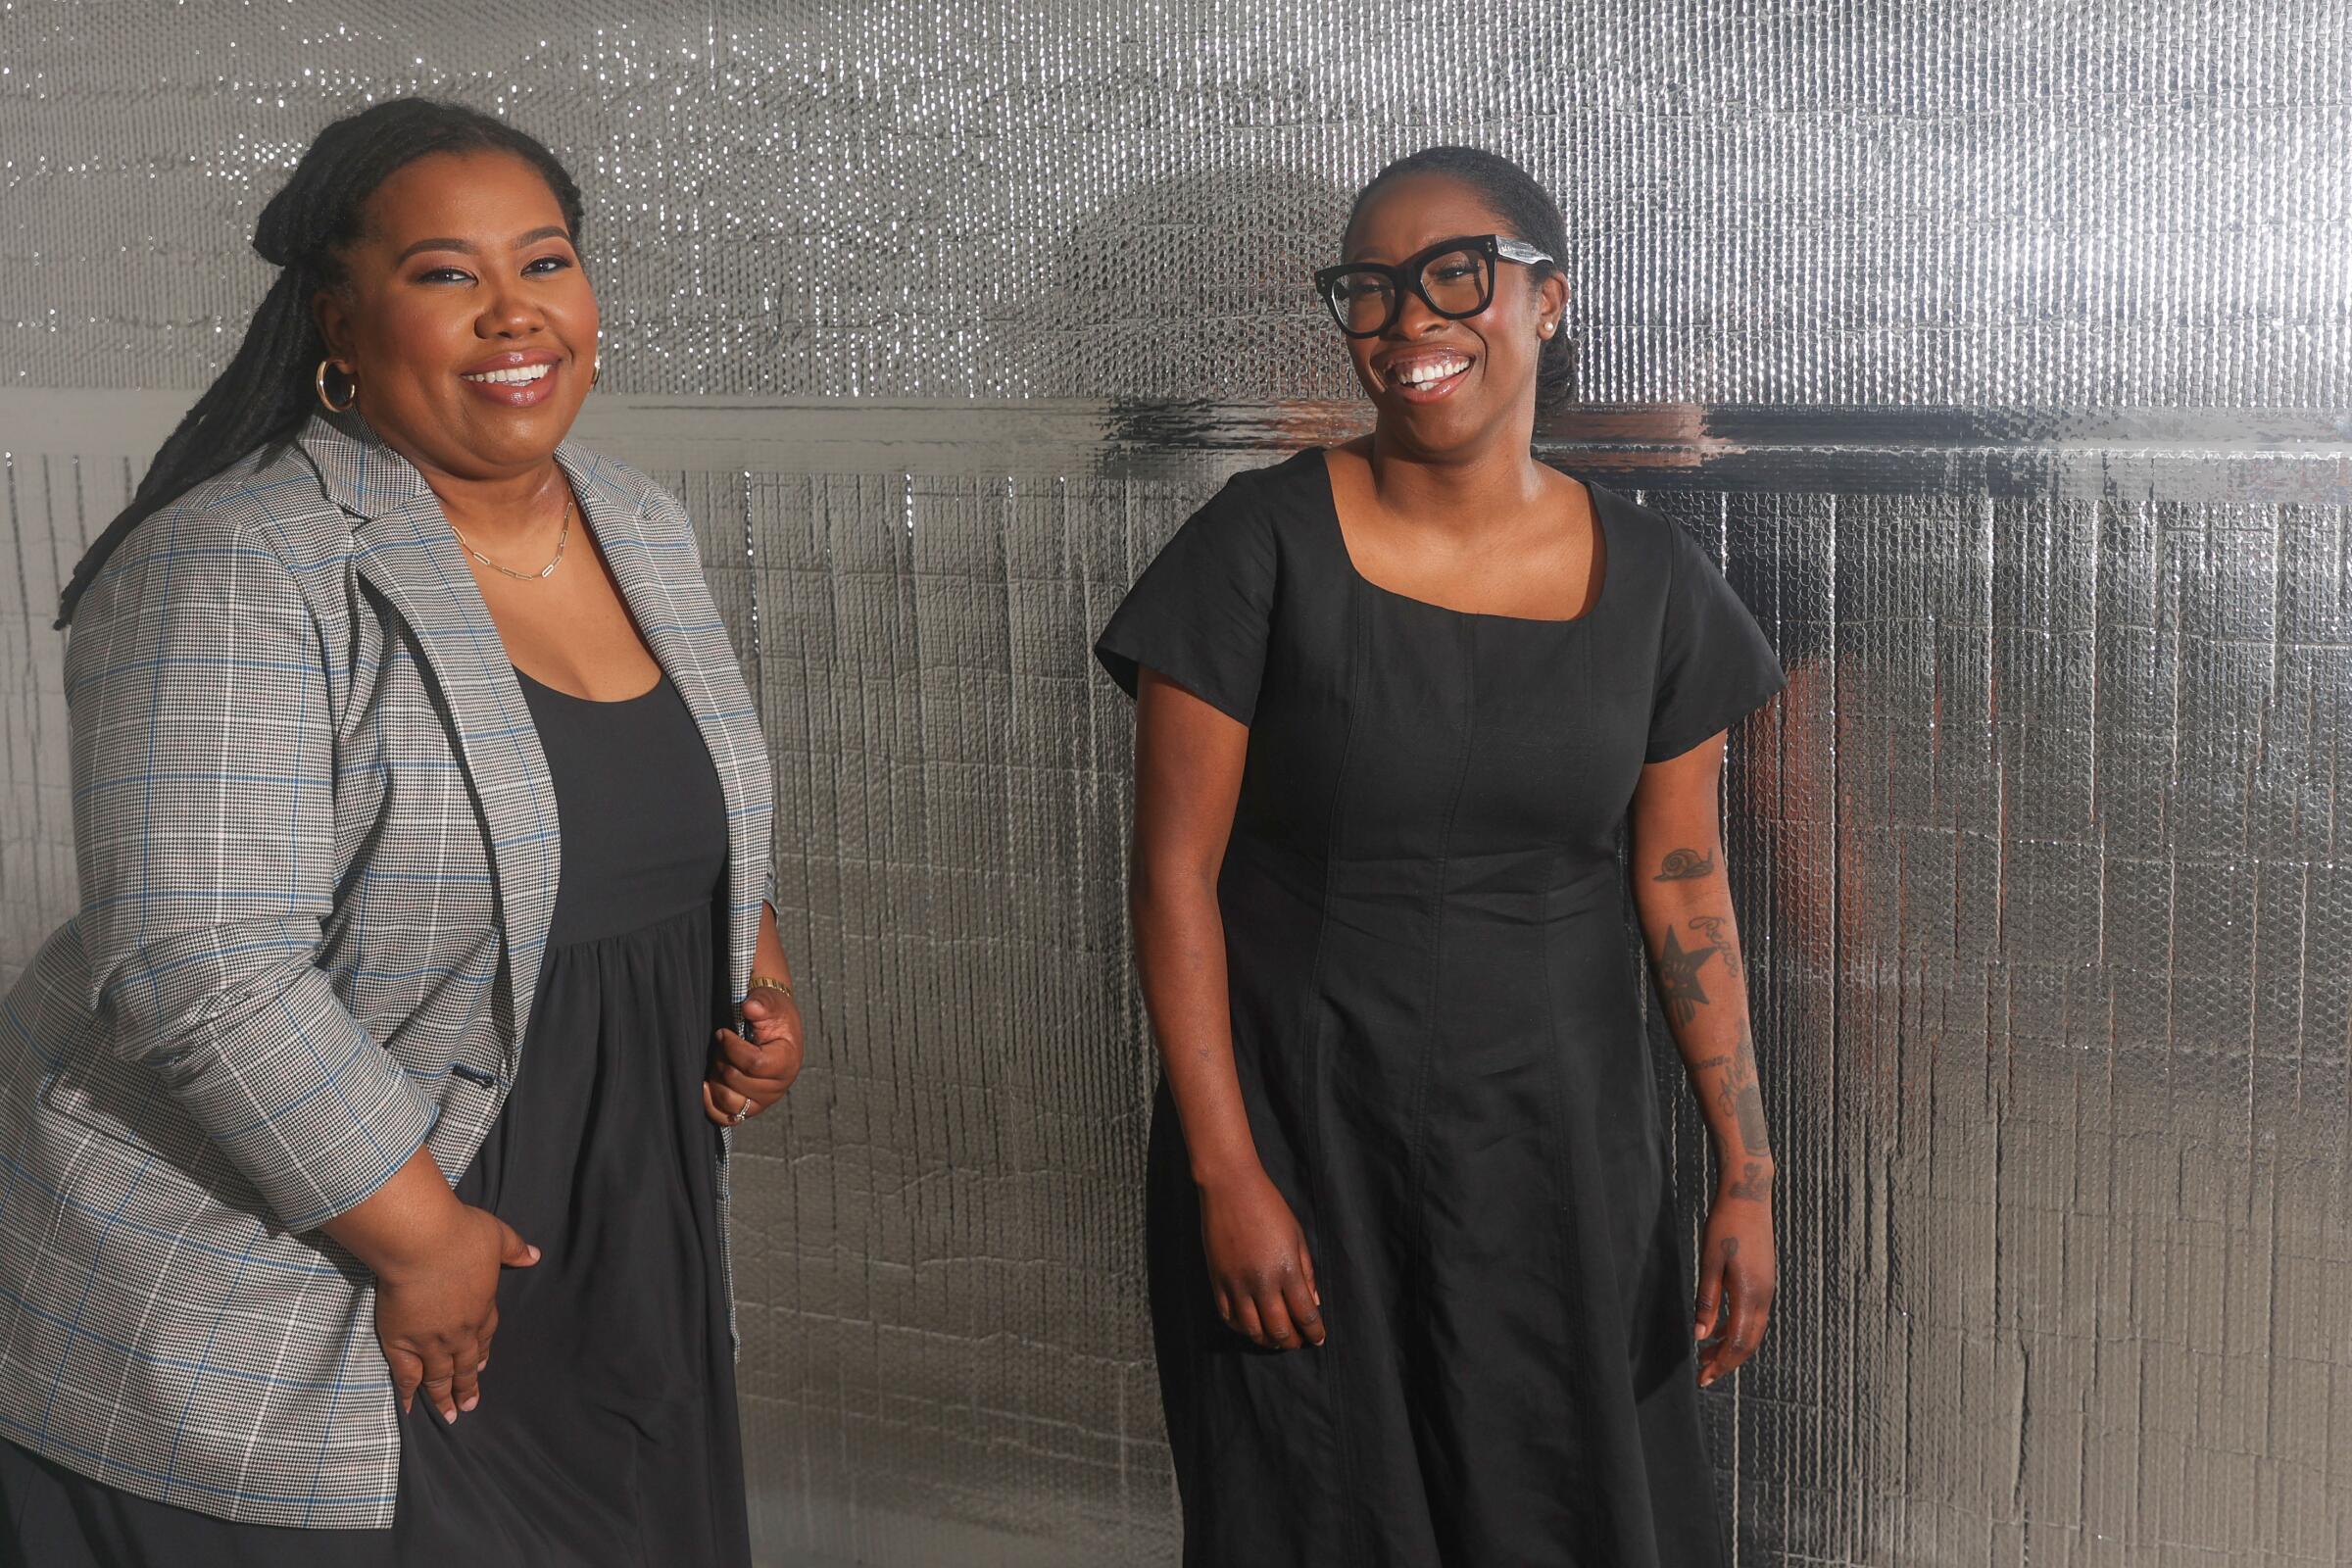 ChargerHelp co-founders Evette Ellis, left, and Kameale Terry